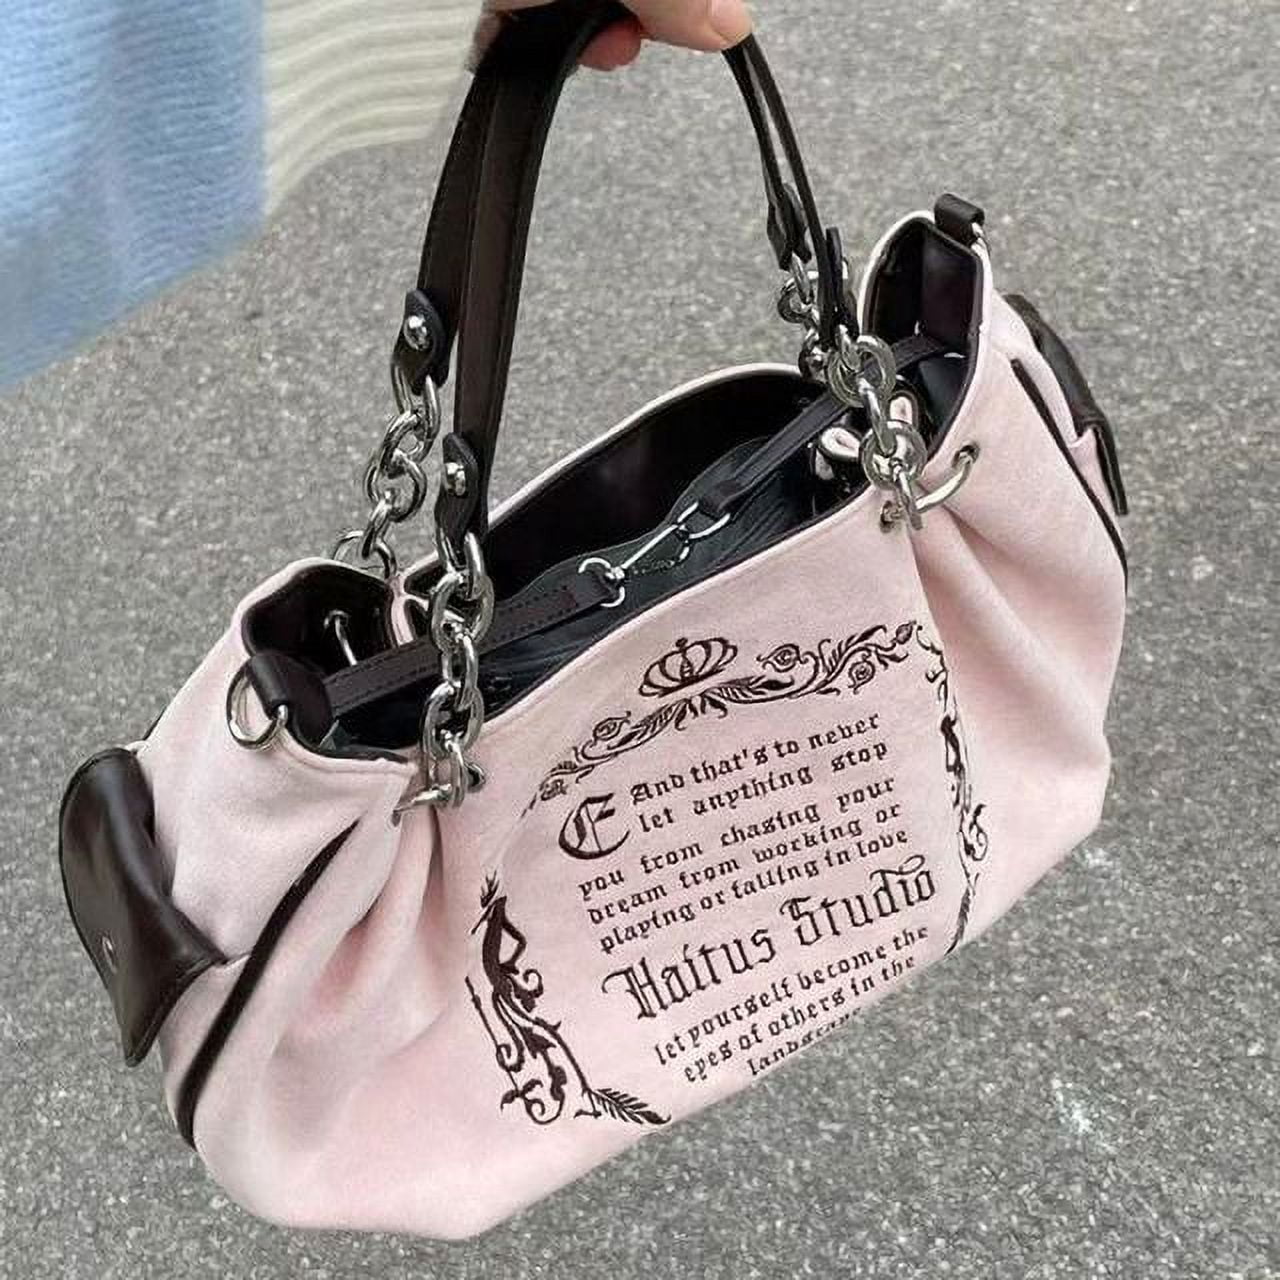 Fashionable Embroidered Women's Tote Bag With Chain Strap, Large Capacity  Set Including Embroidered Diamond Pattern Shoulder Bag